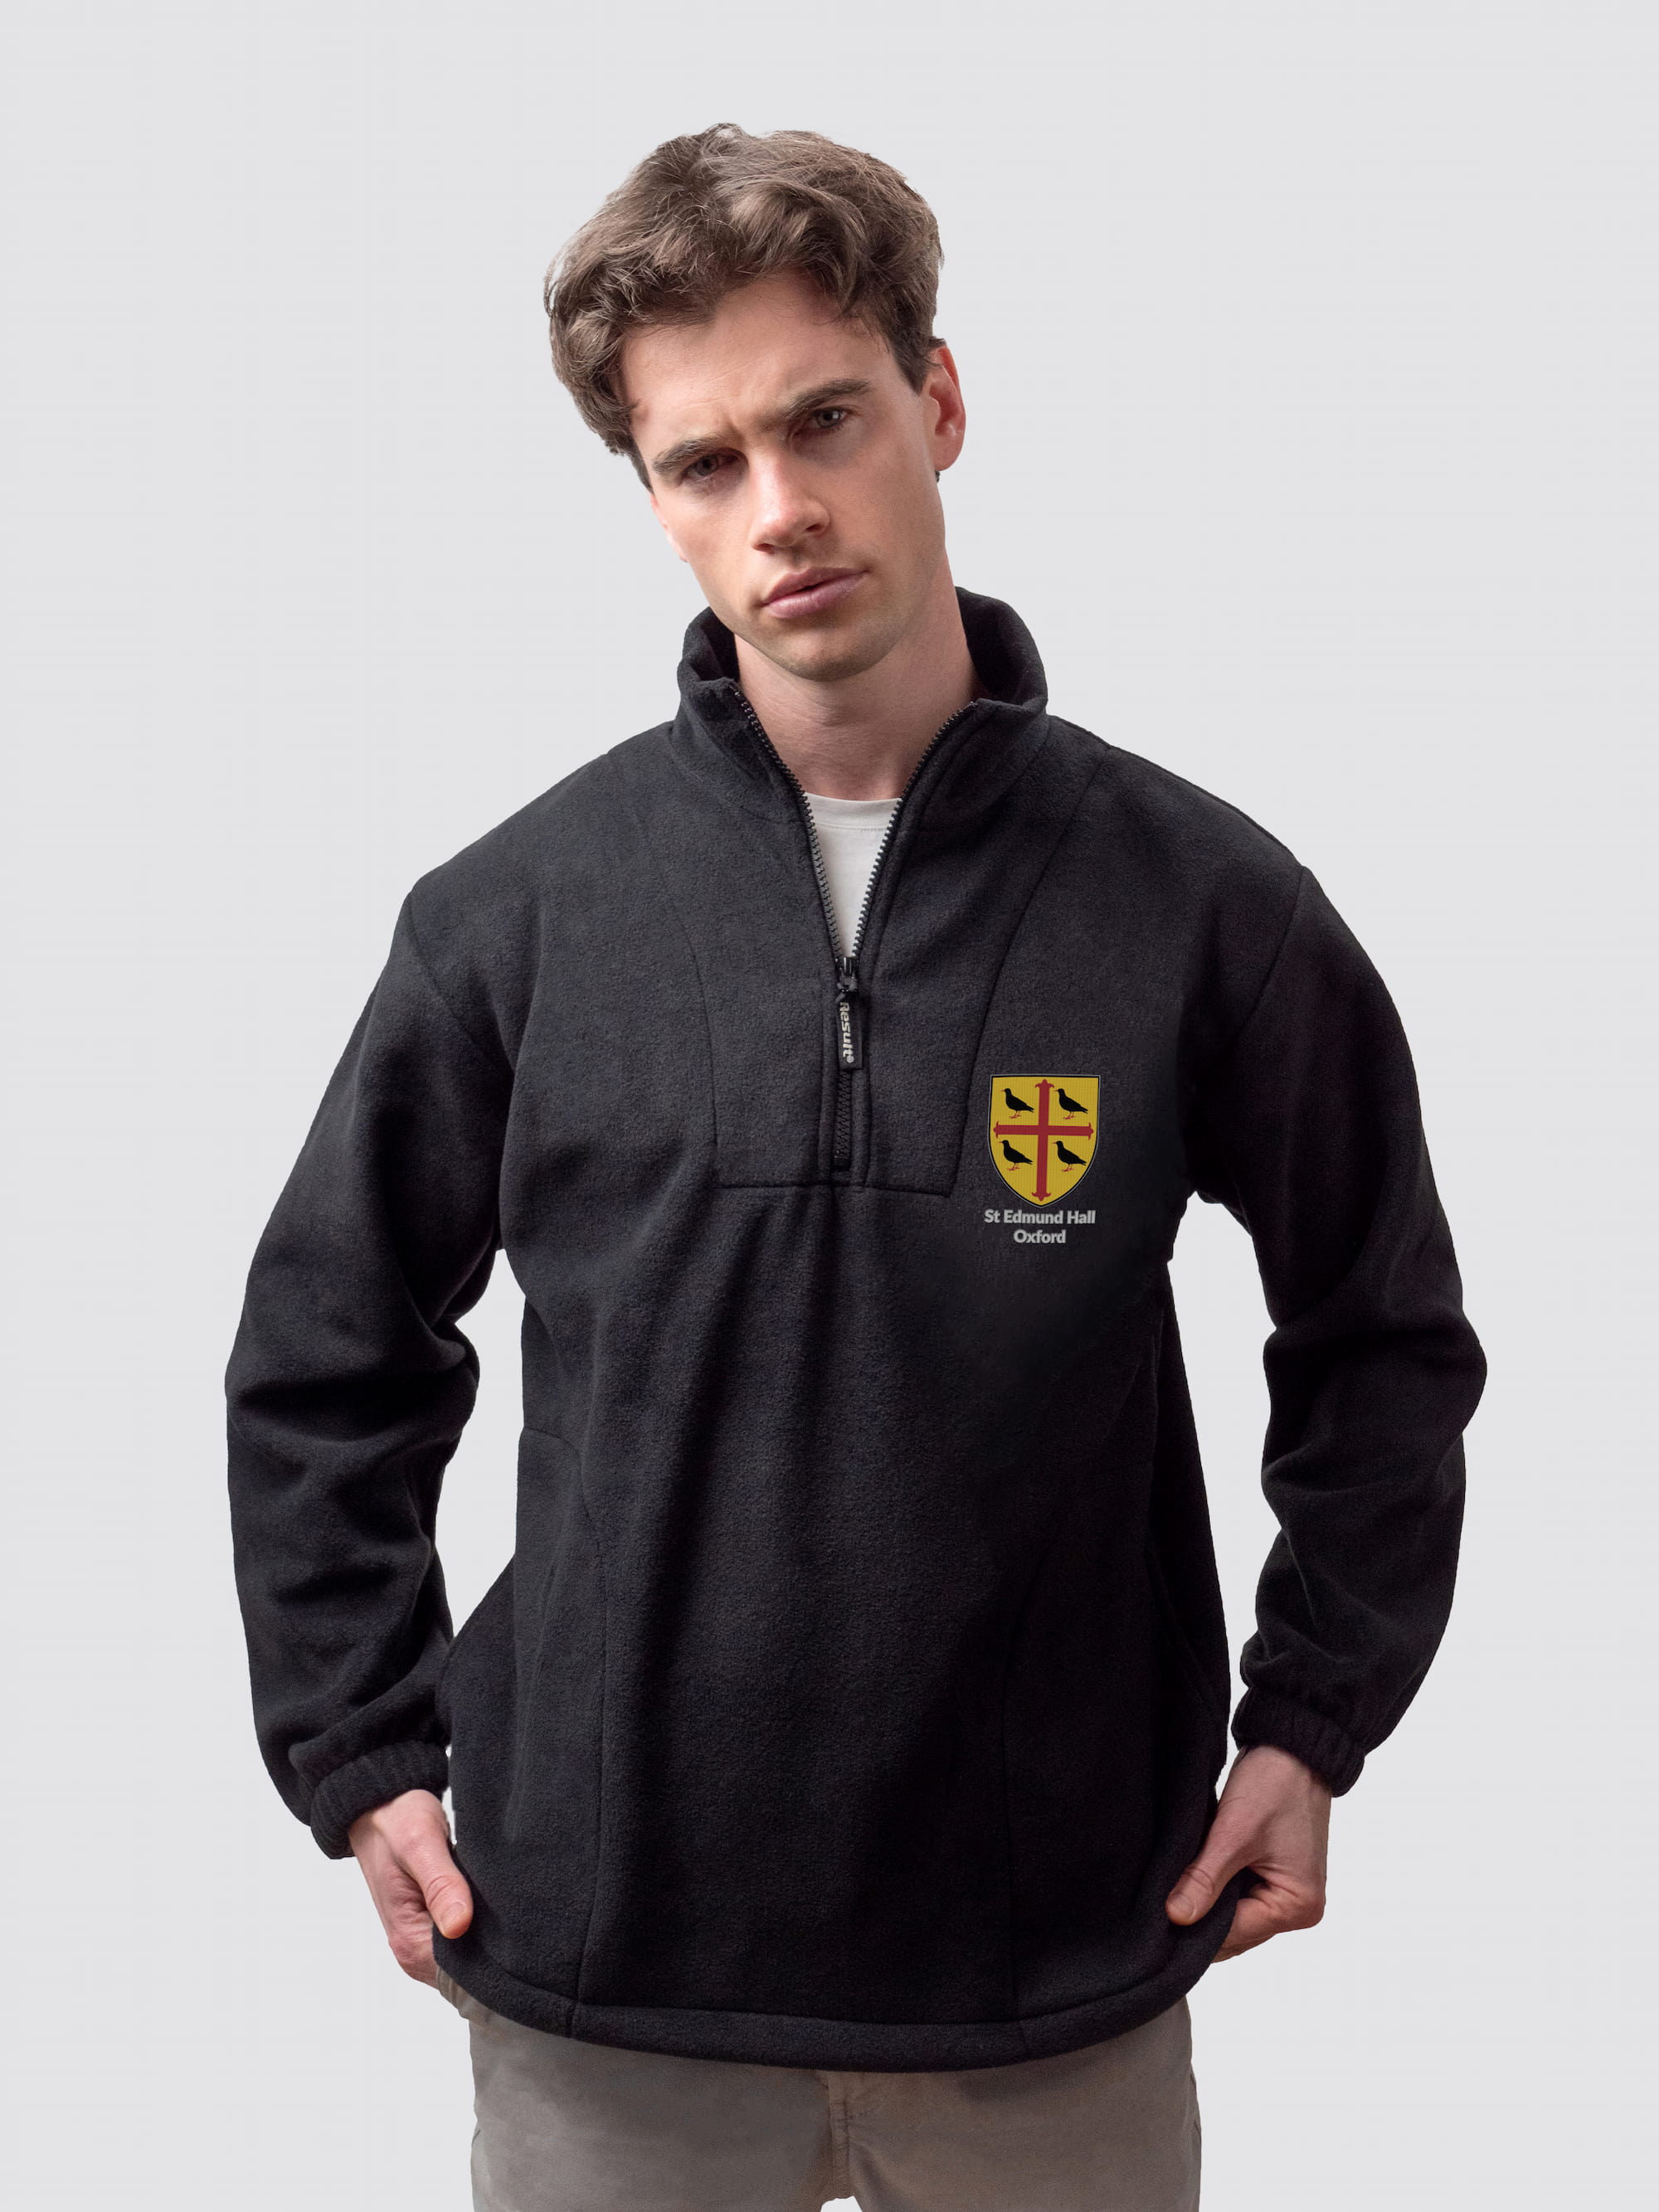 Oxford university fleece, with custom embroidered initials and St Edmund Hall crest